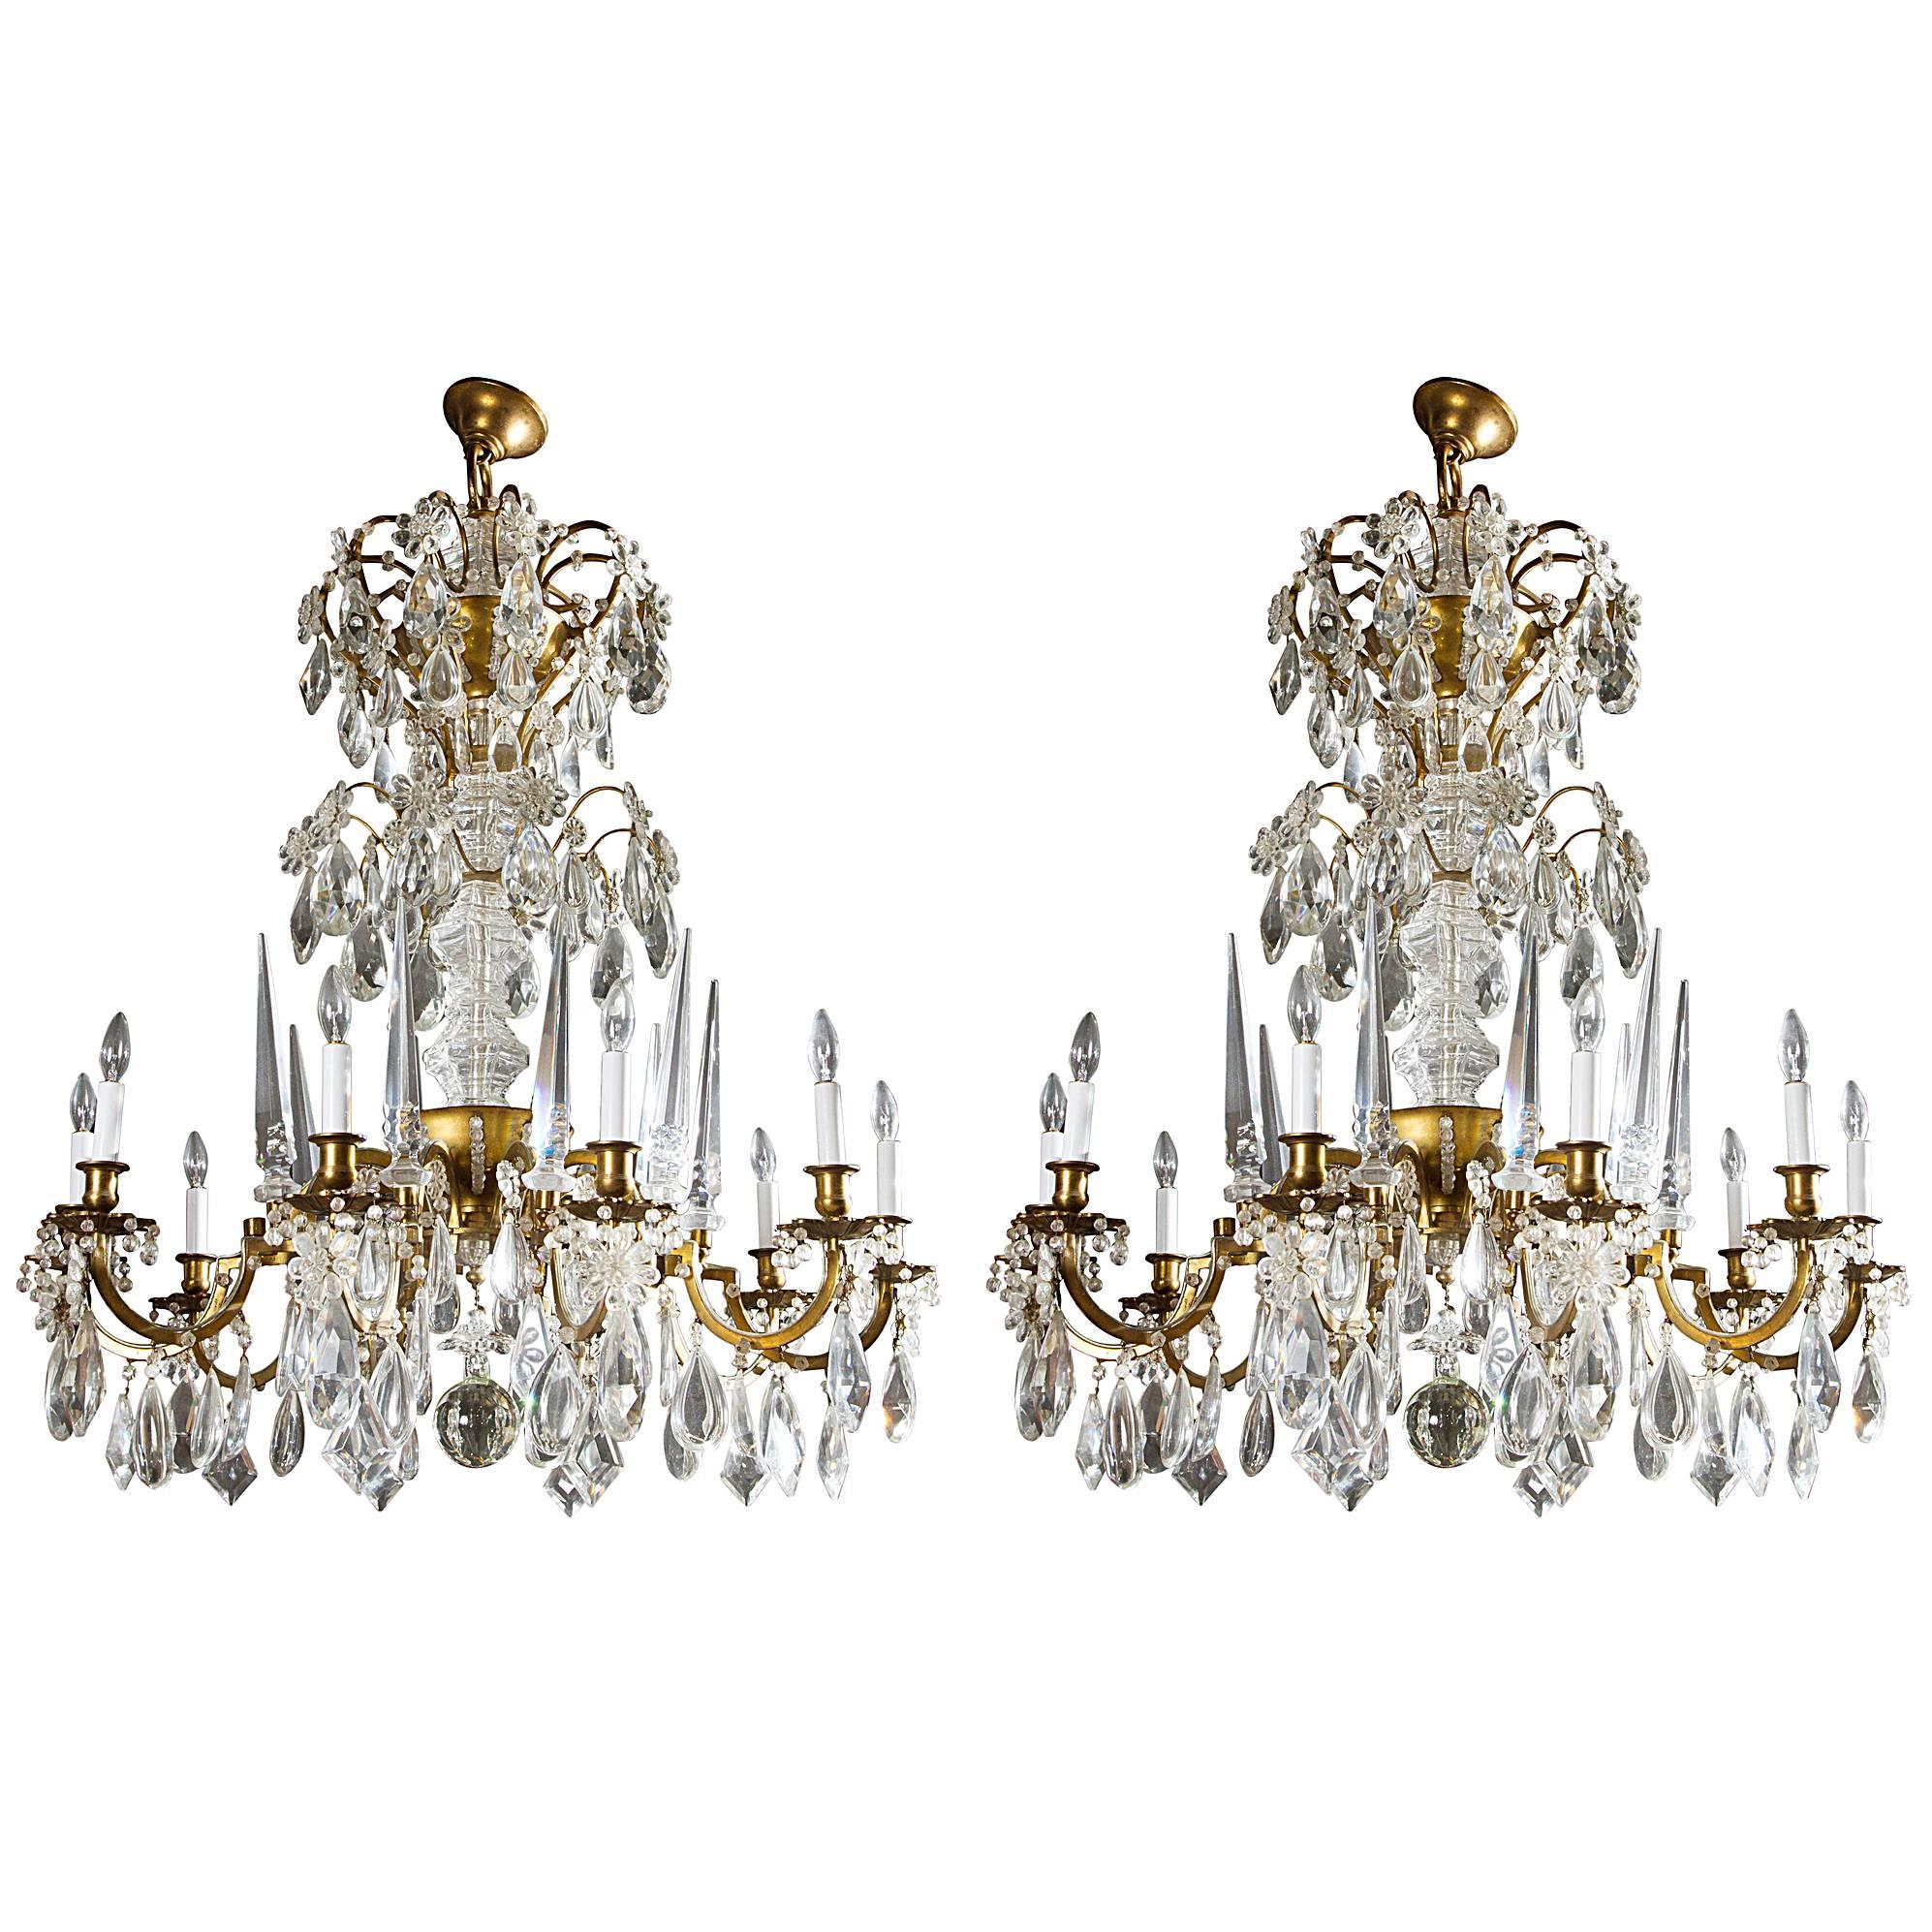 Important Pair of Crystal Chandeliers by Maison Baguès